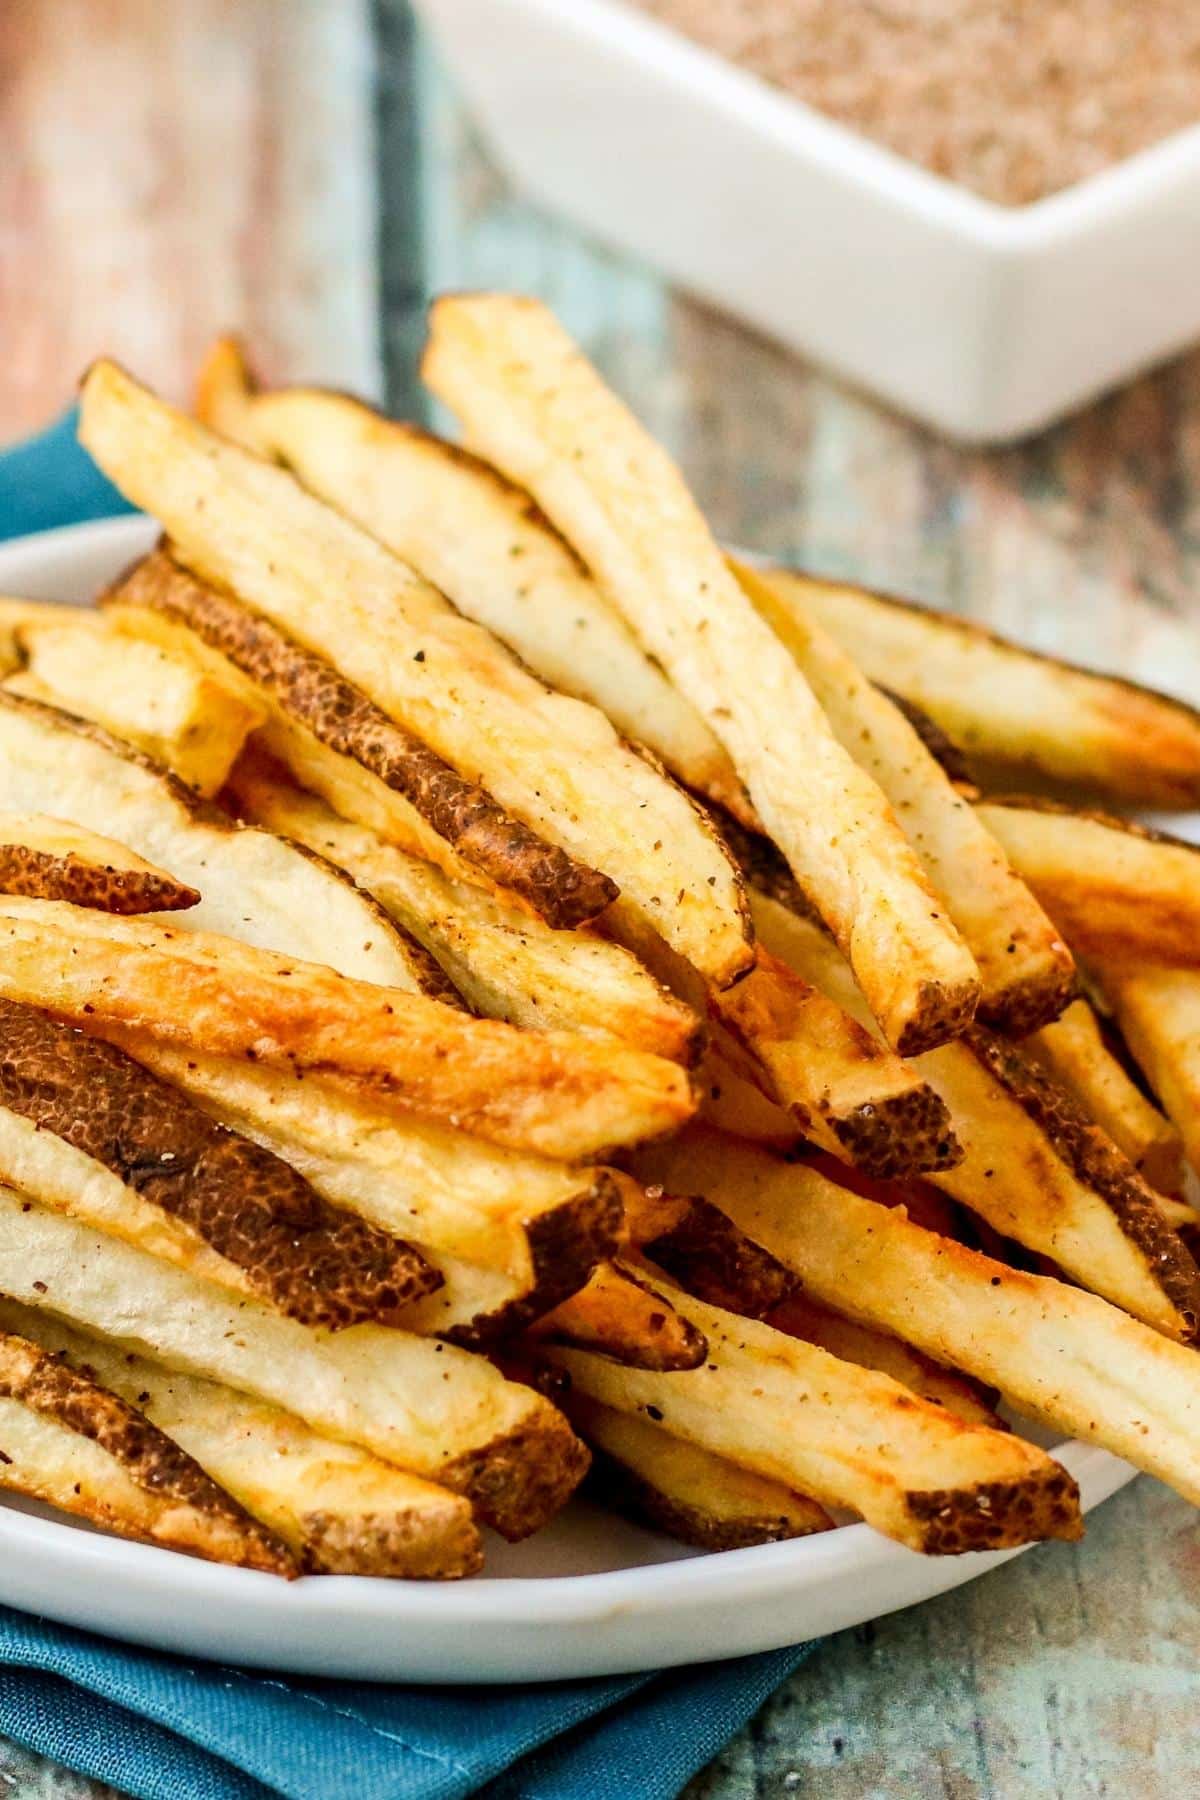 Close up image of side view of plate of french fries with bowl of seasoned salt in the background.